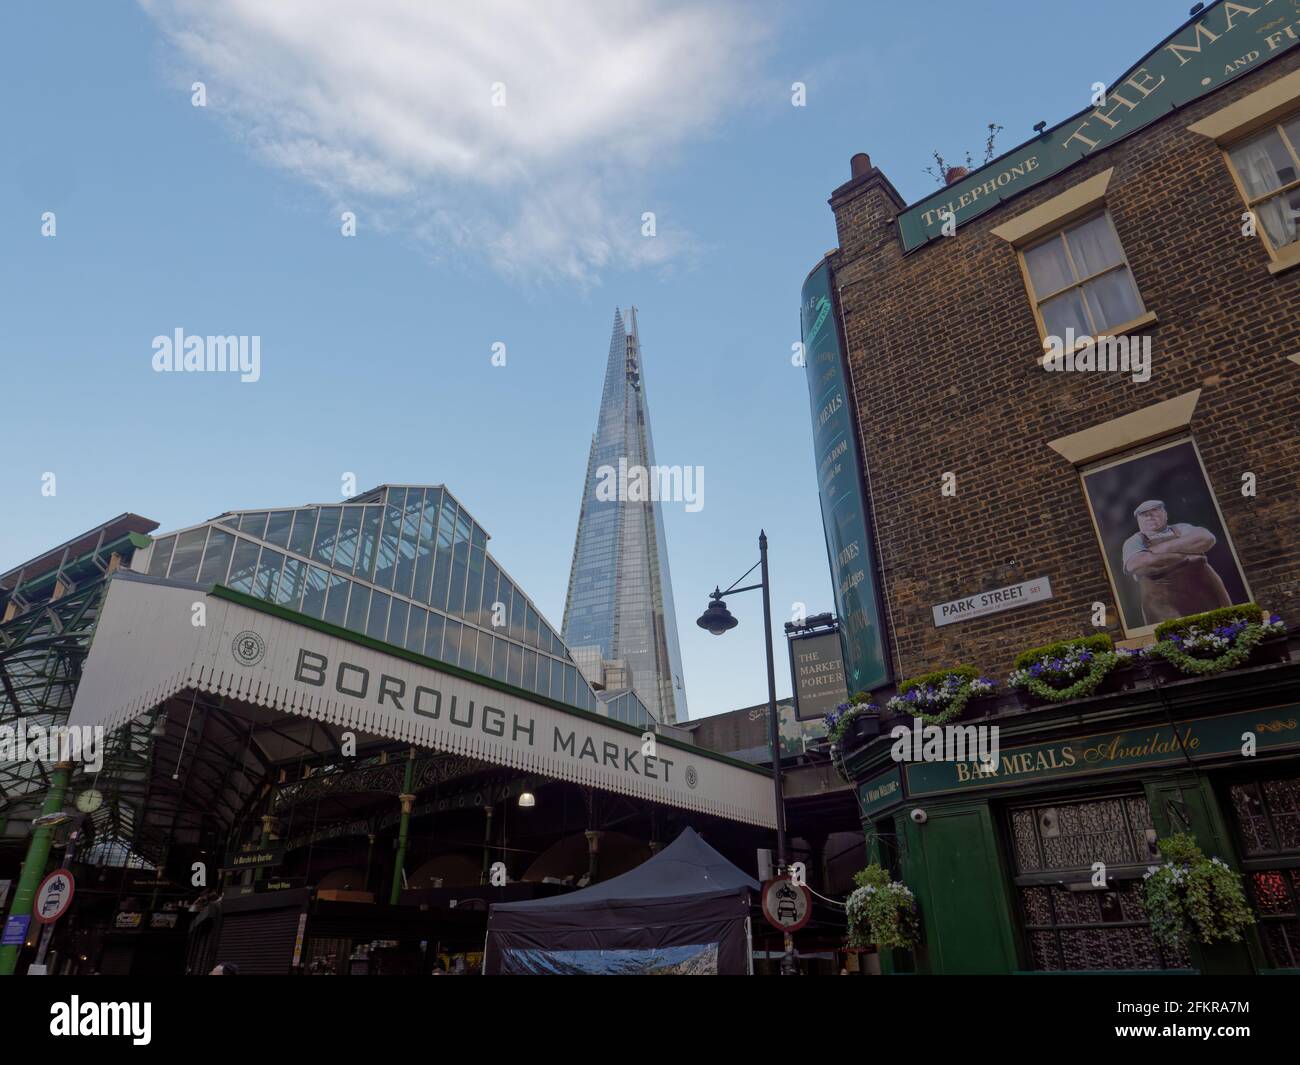 London, Greater London, England - Apr 27 2021: Borough Market (a famous undercover food market) with The Shard skyscraper behind. Stock Photo